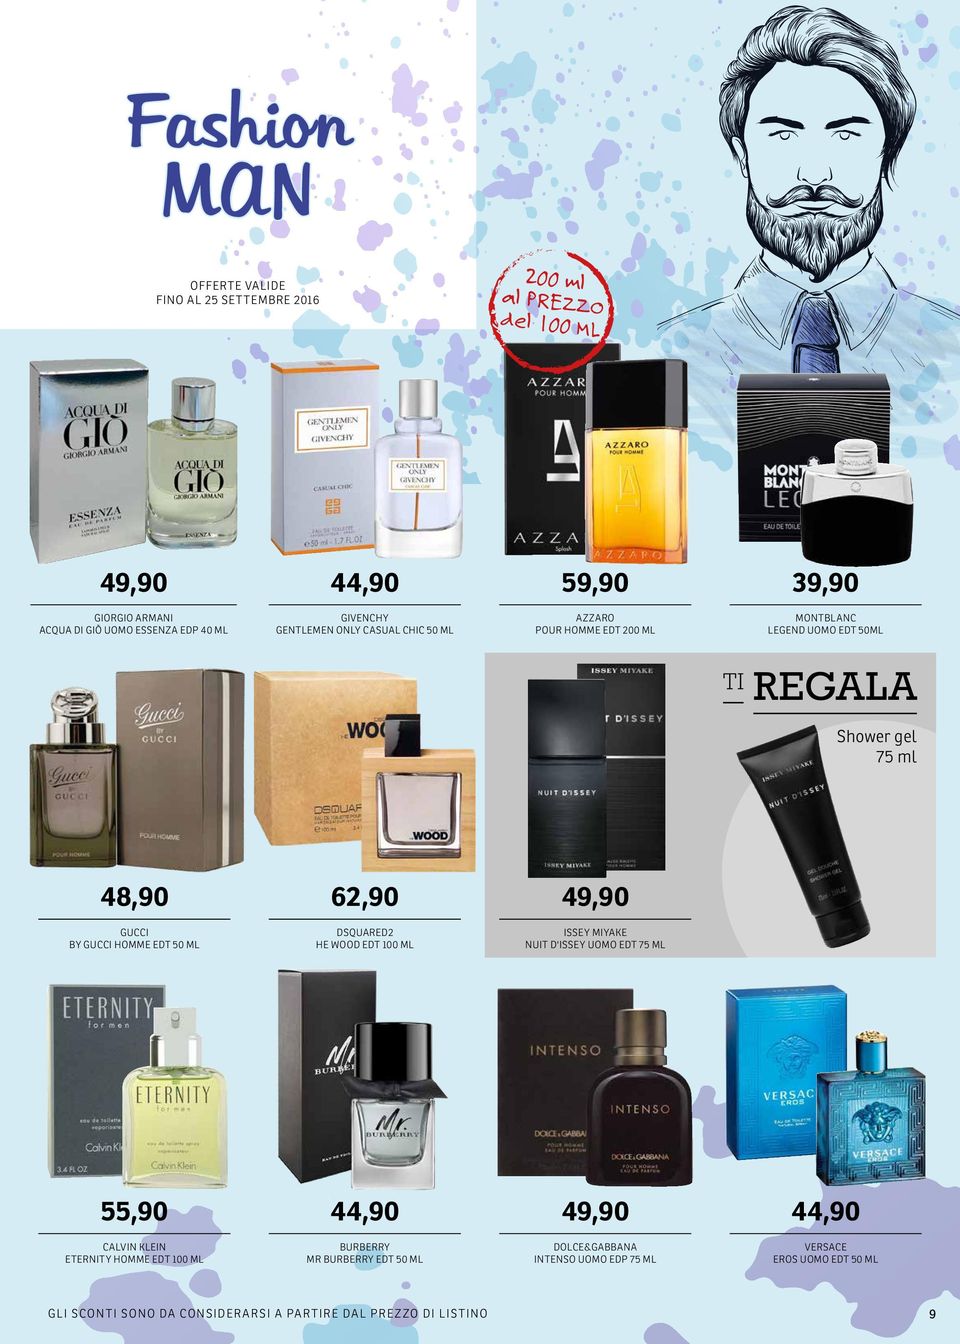 HOMME EDT 50 ML DSQUARED2 HE WOOD EDT 100 ML ISSEY MIYAKE NUIT D'ISSEY UOMO EDT 75 ML 55,90 44,90 49,90 44,90 CALVIN KLEIN ETERNITY HOMME EDT 100 ML BURBERRY MR